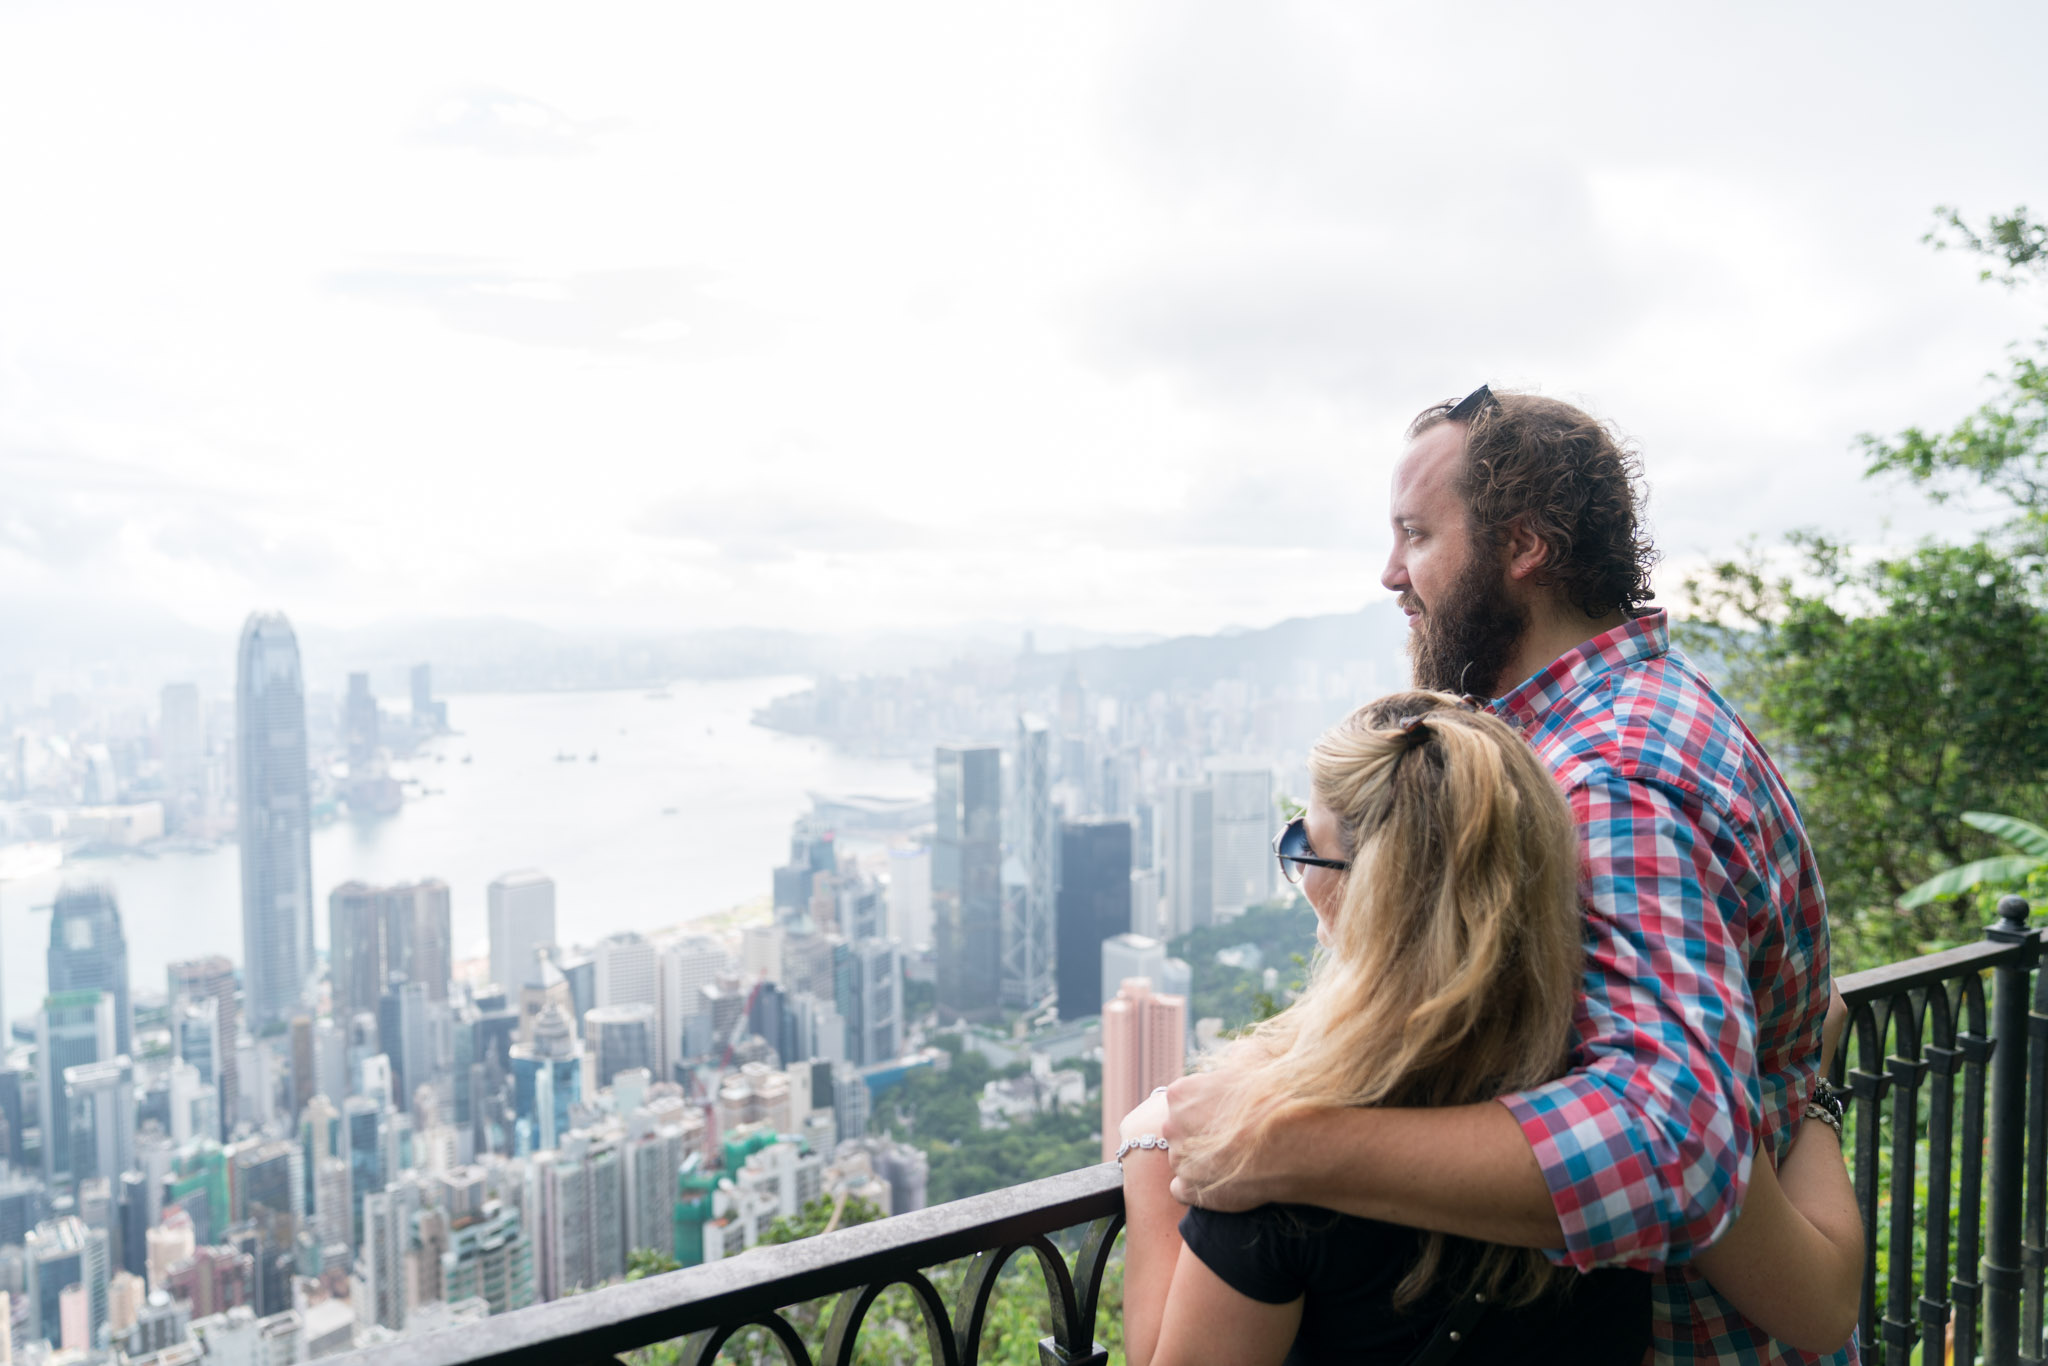 a man and woman sitting on a balcony overlooking a city